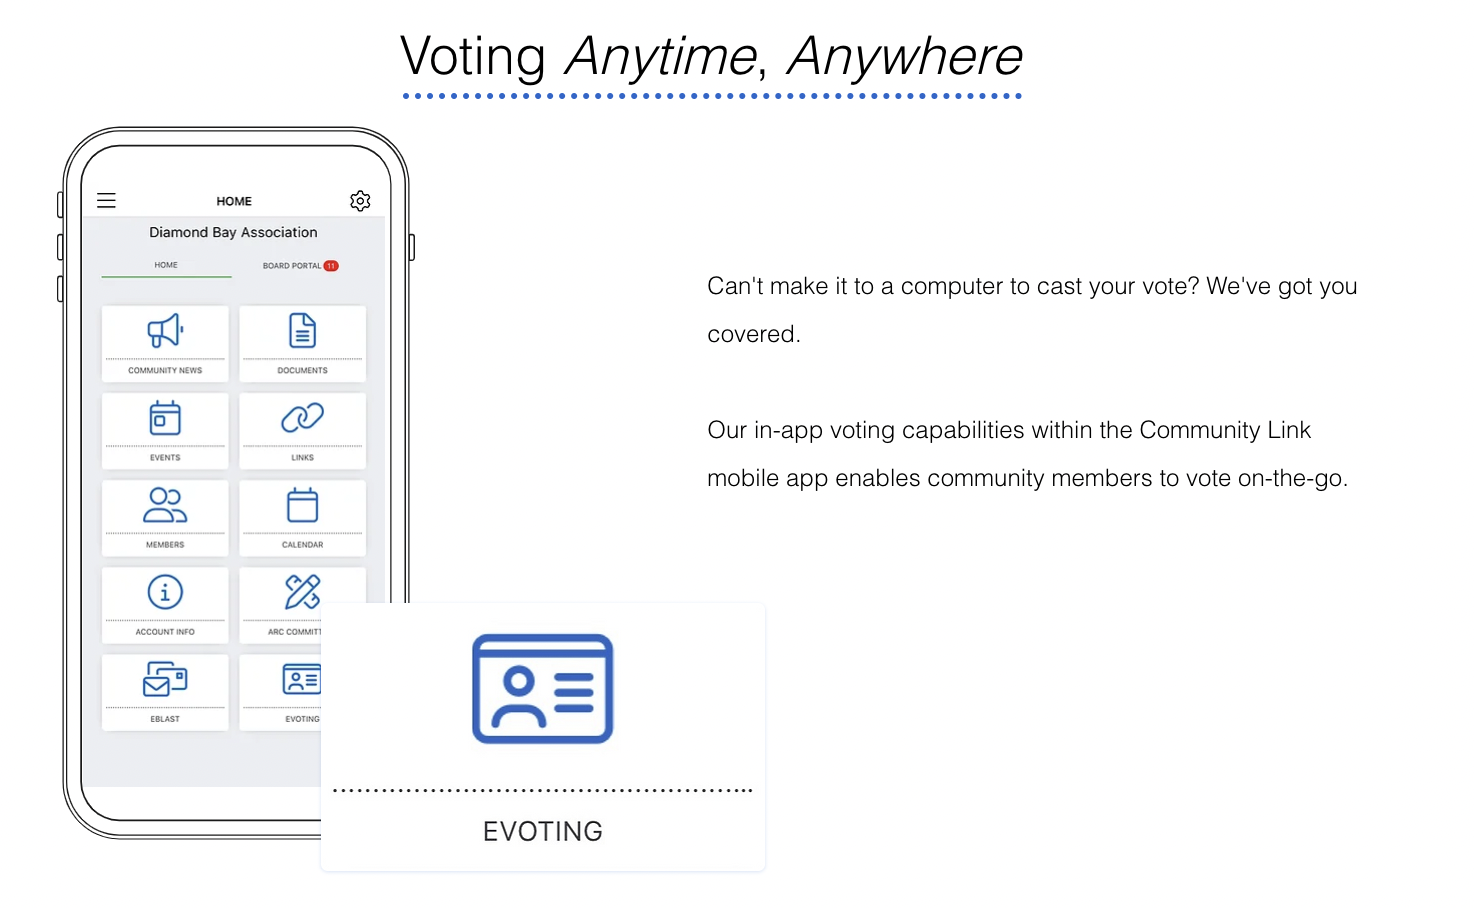 Voting Has Never Been Easier  Our eVoting software is a fast and efficient way for managers to conduct elections. Our secure, cloud-based platform makes it easy to achieve quorum minimizing the need for repeat elections.